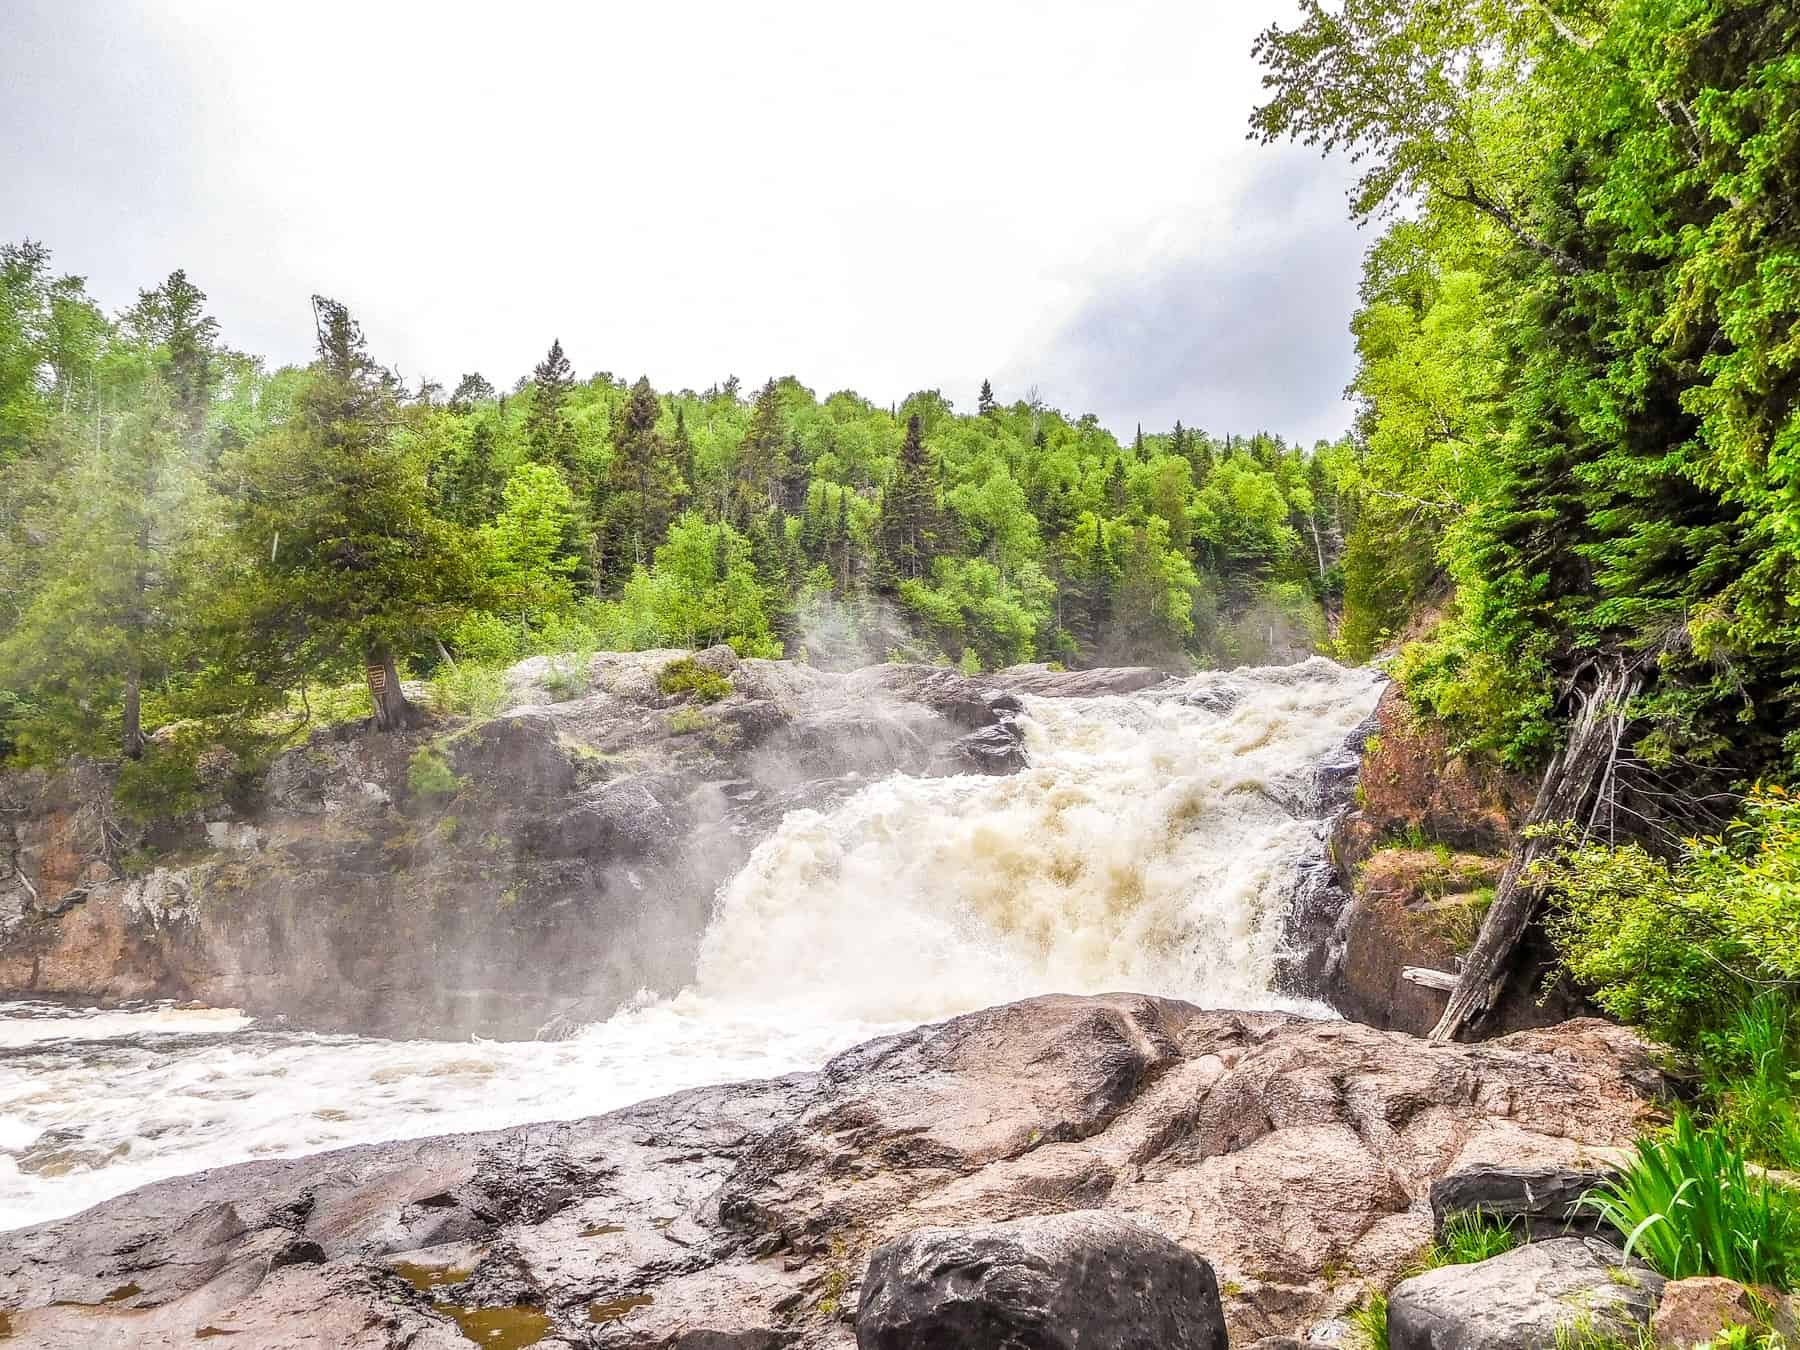 Lower Falls on the Brule River at Judge CR Magney State Park